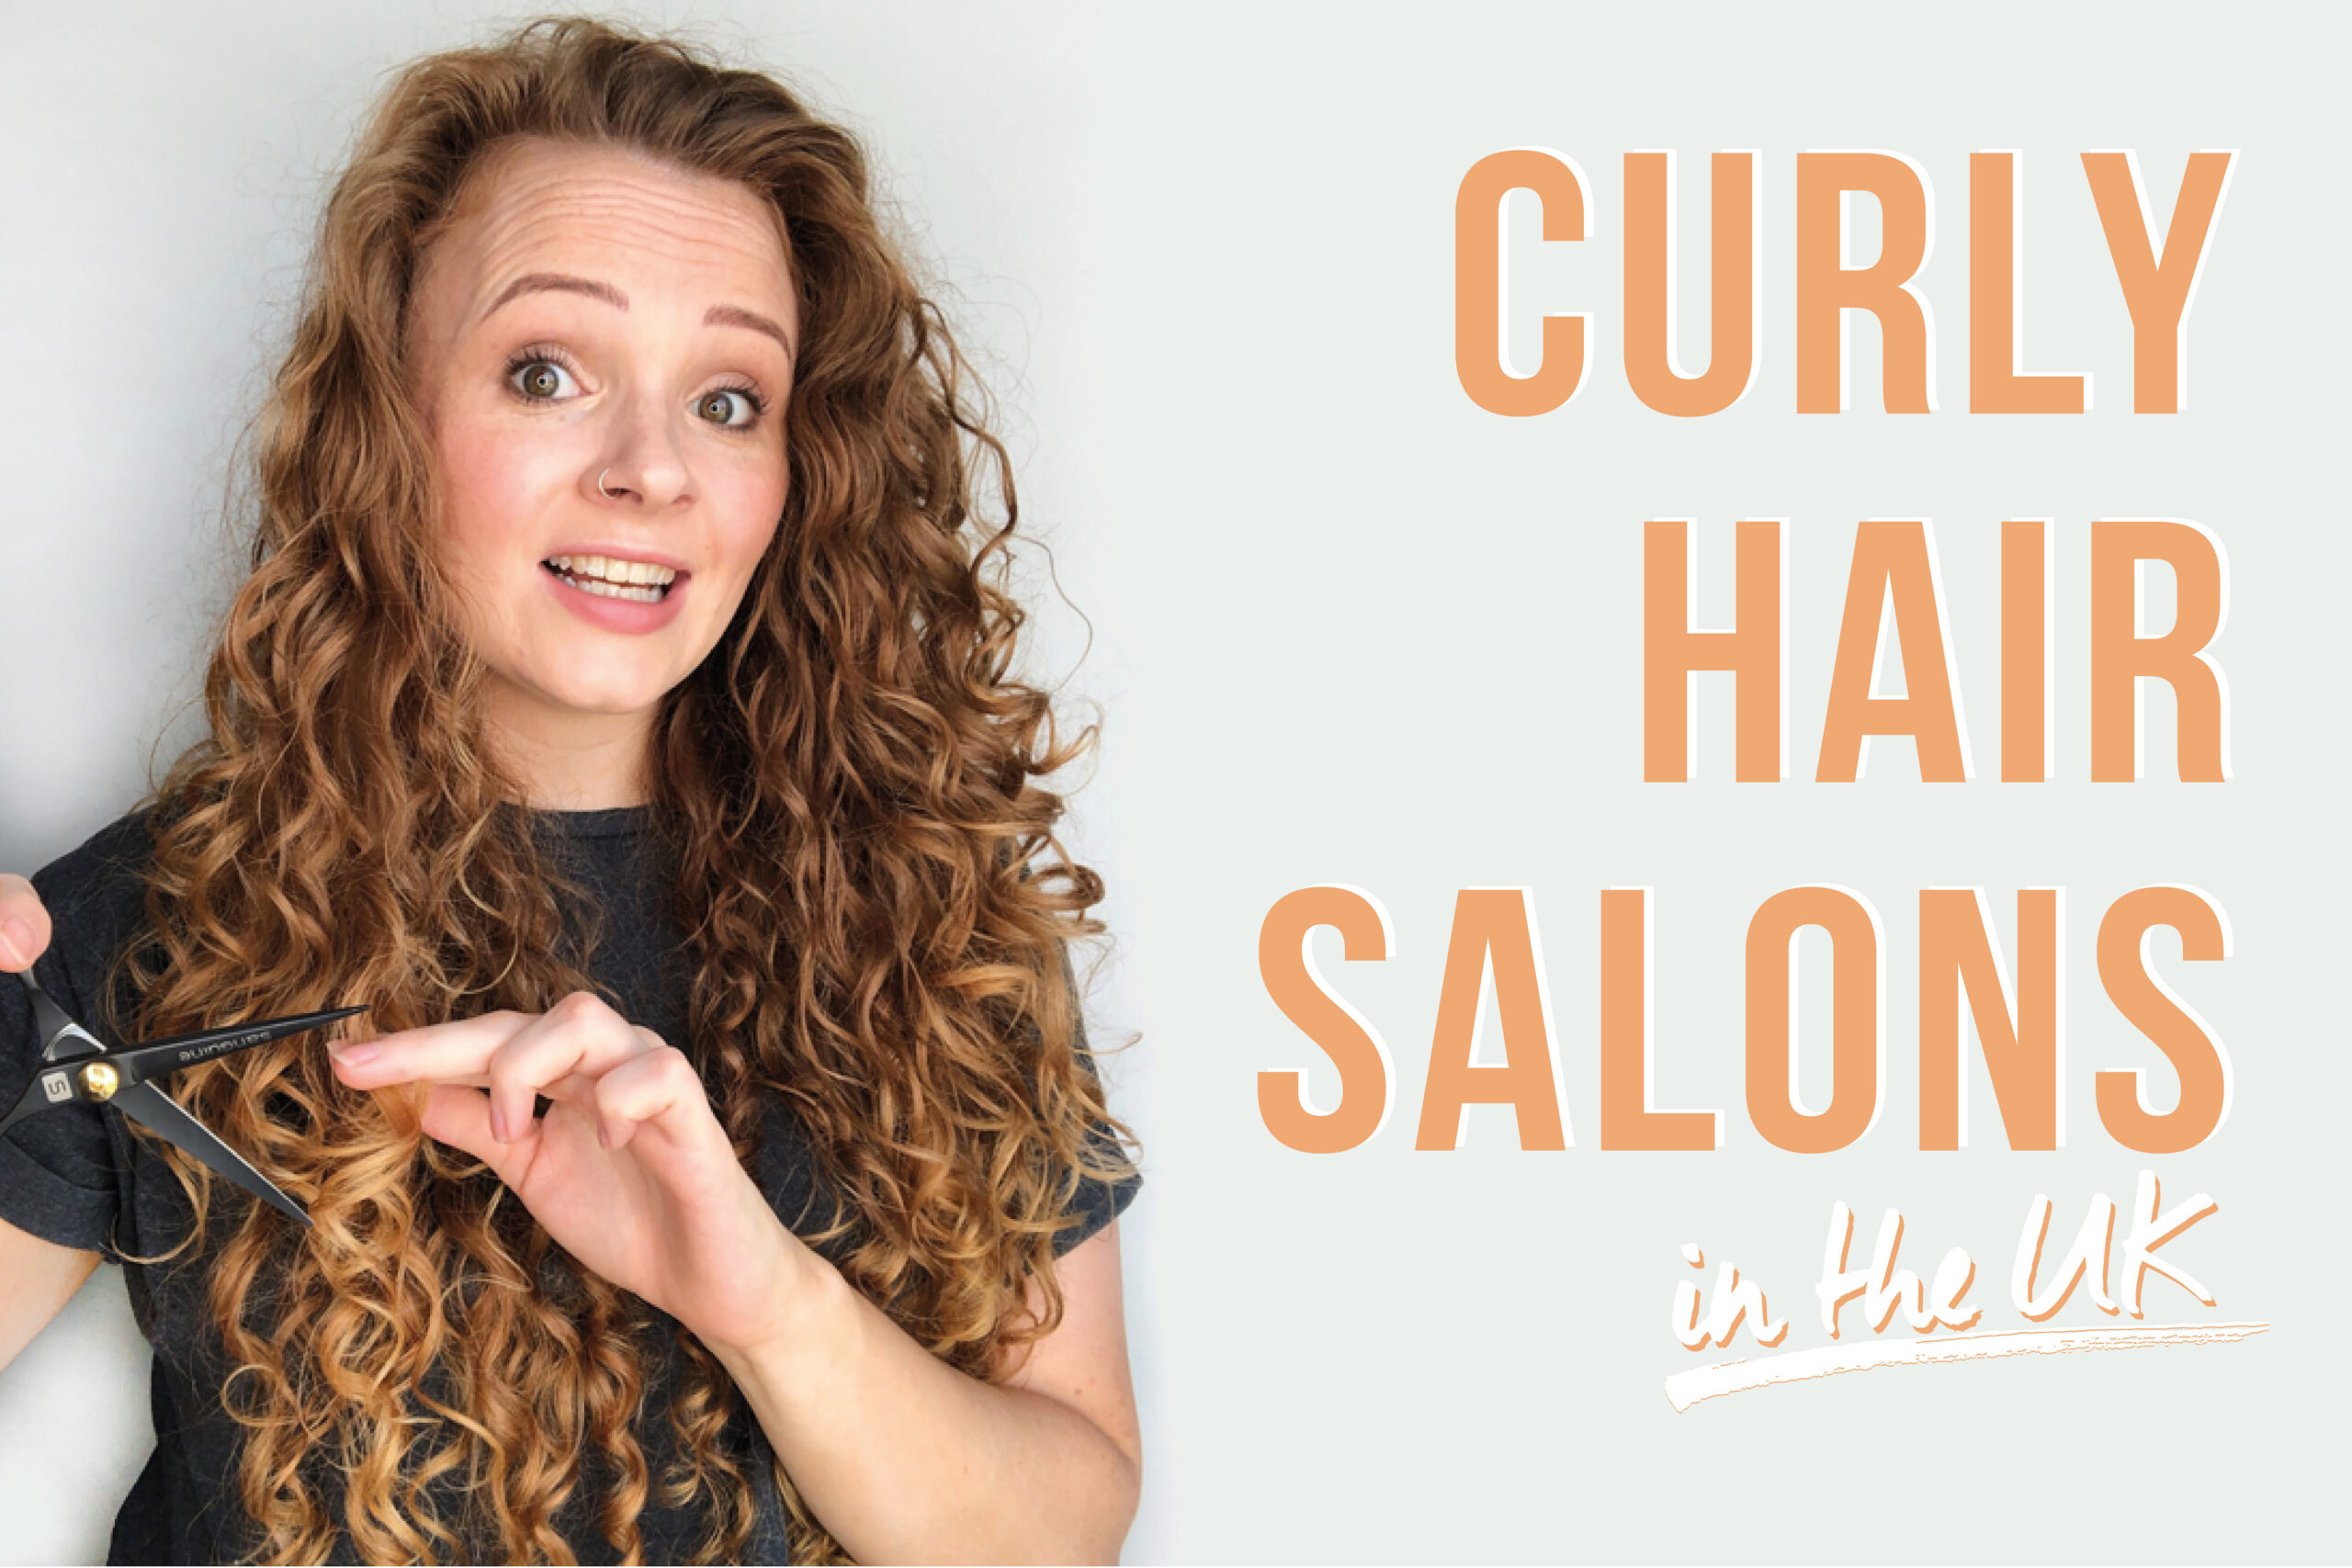 Top 17 Curly Hair Salons in the UK and Ireland -